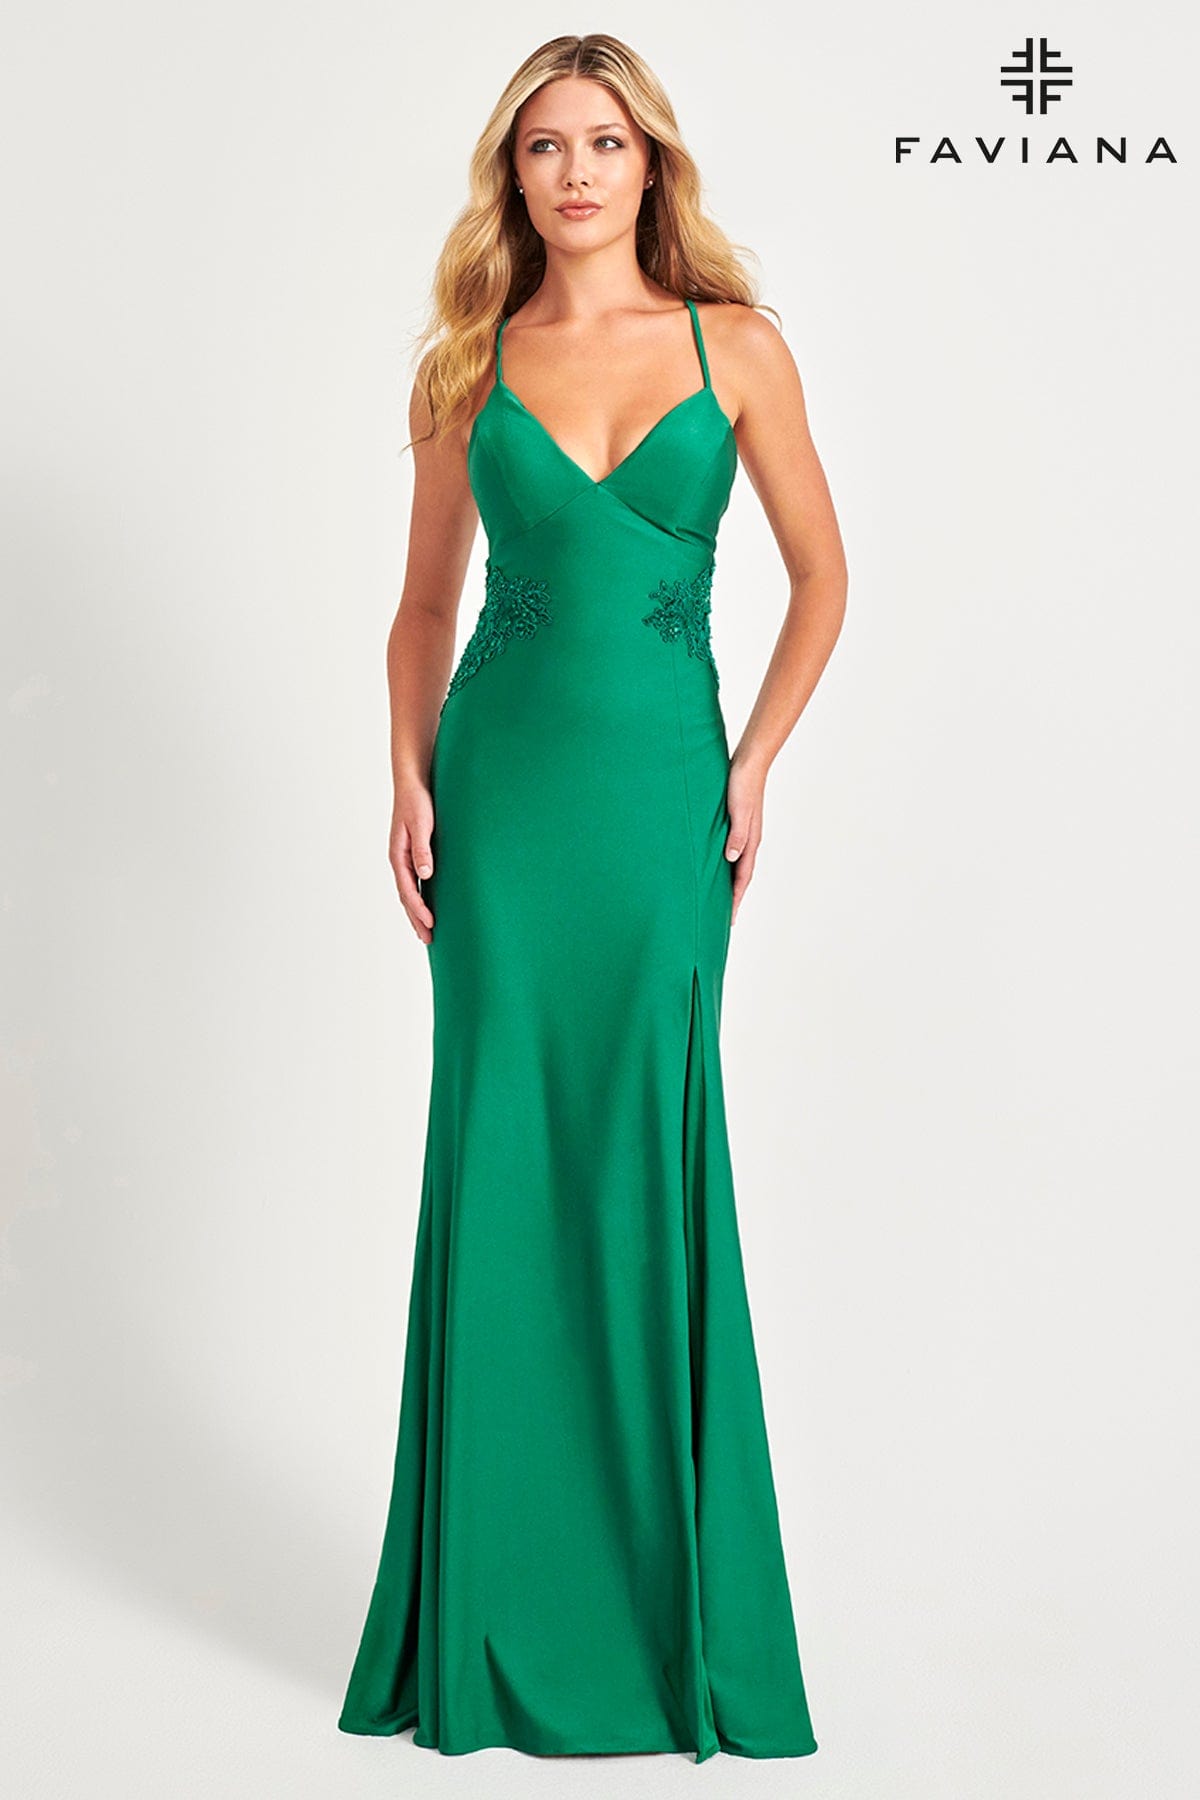 Dark Emerald V-Neck Lace Up Back Long Dress With Beaded Lace At Waist And Skirt | 11020